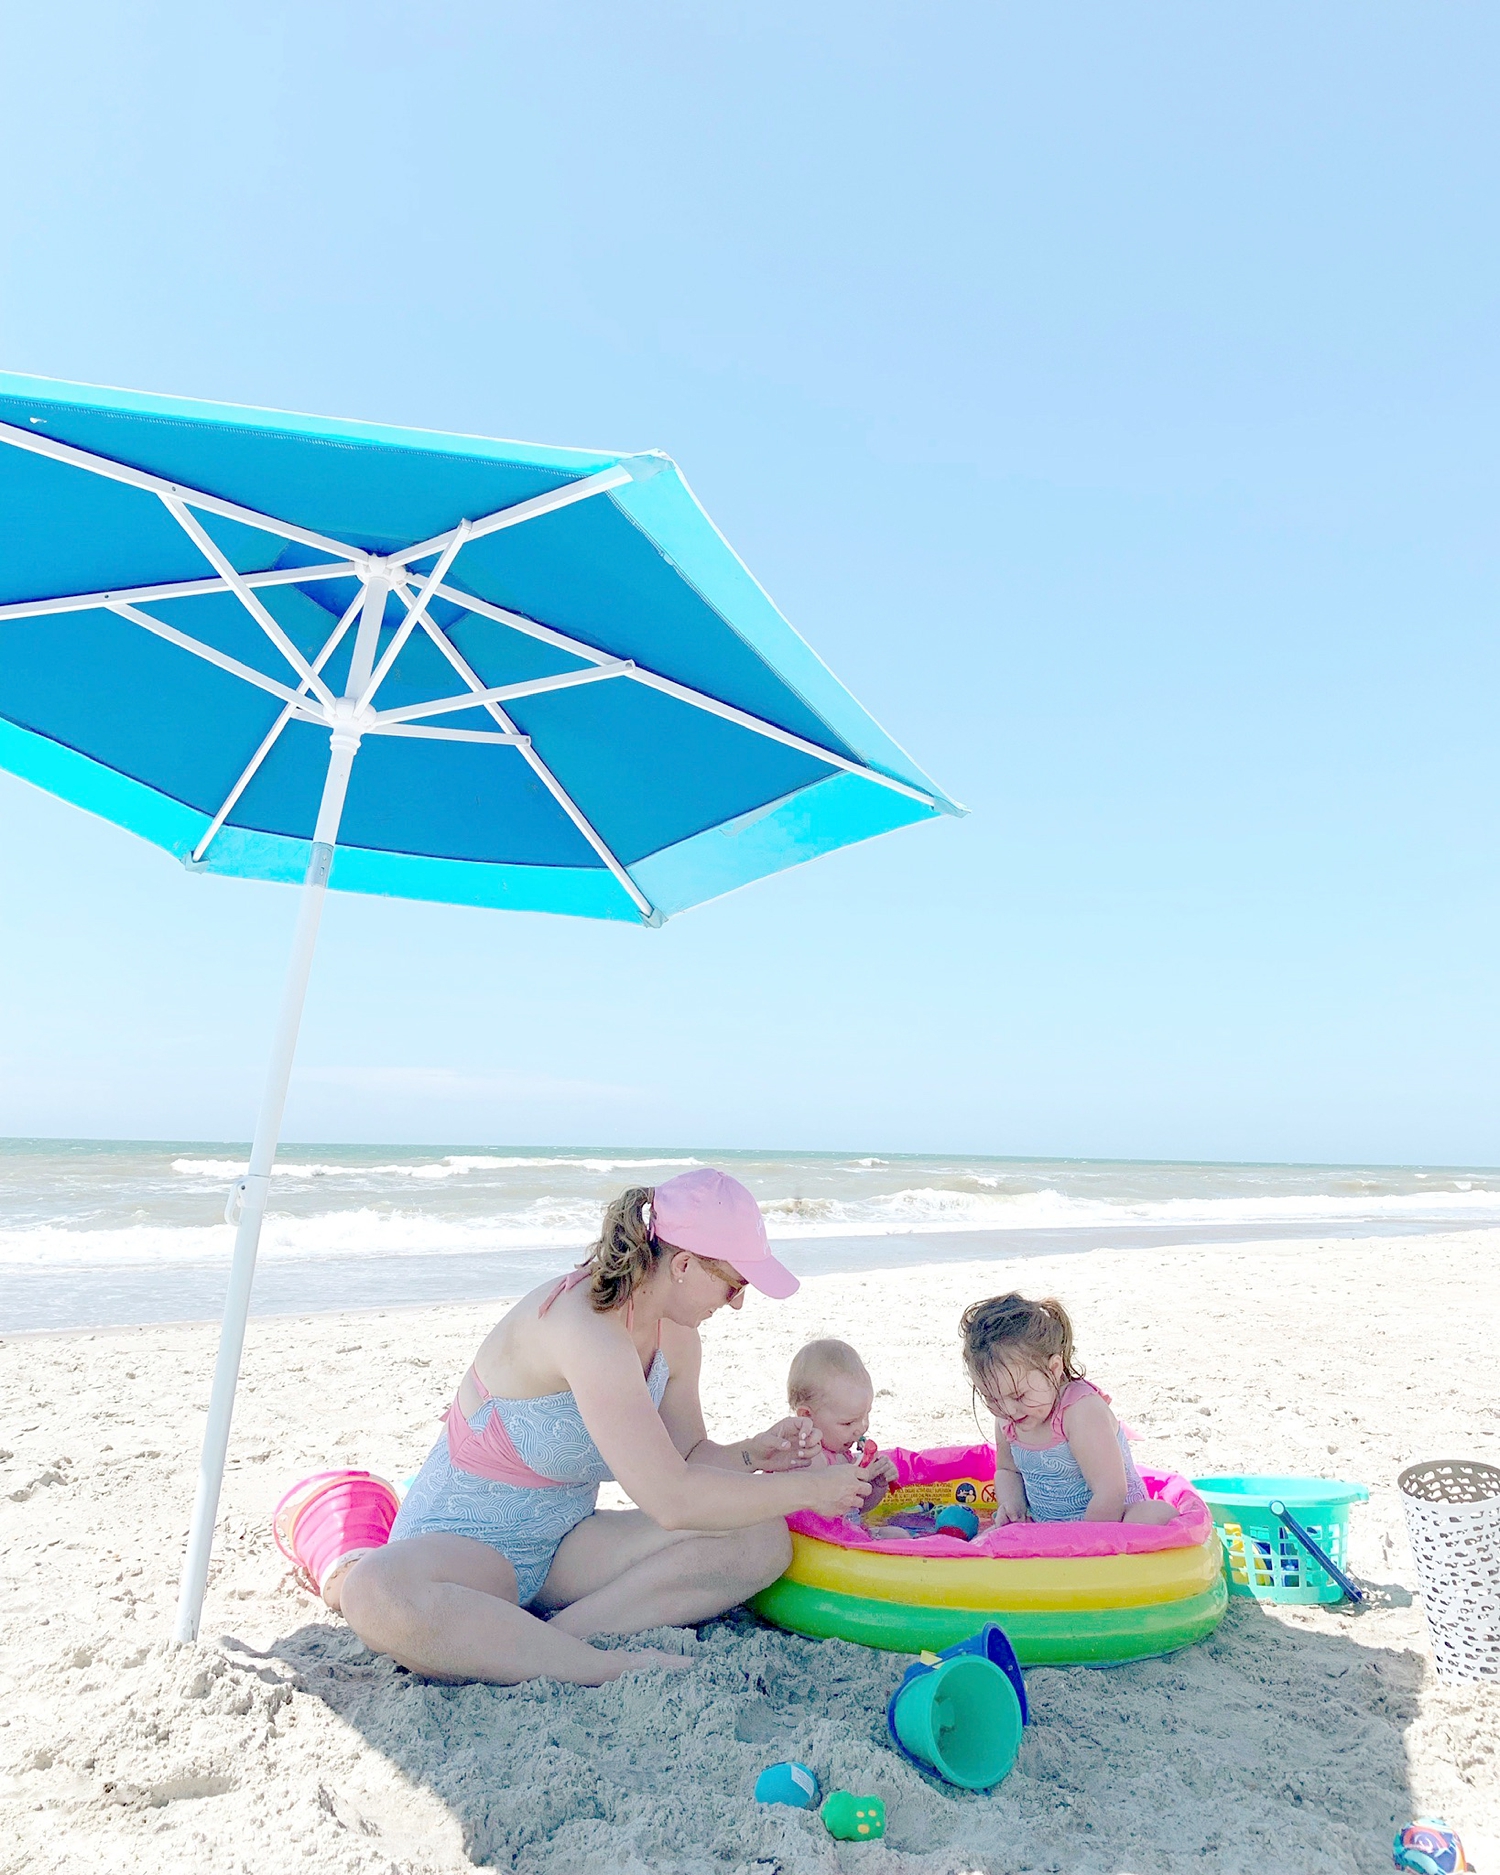  Having the small baby pool hands-down was the best thing we brought. So cheap and the best thing for toddlers because they can play in the water and sand without going on the ocean. I got ours at Big Lots for $5 but they sell them everywhere!  